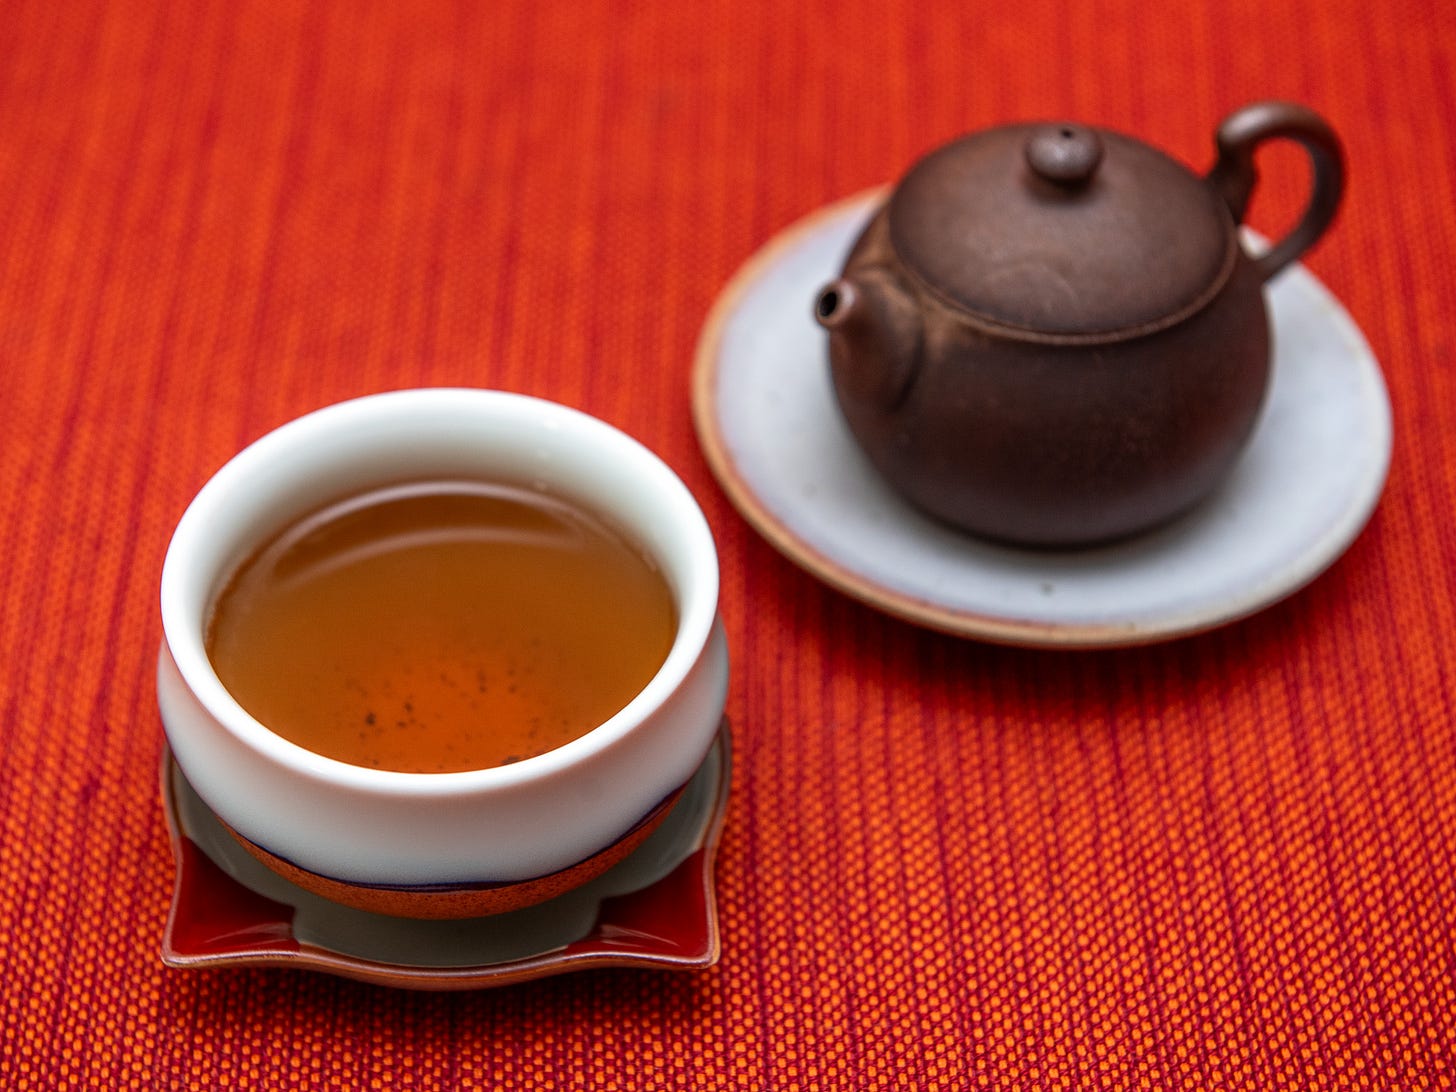 ID: Brewed Wistaria Hongyin puer and clay teapot